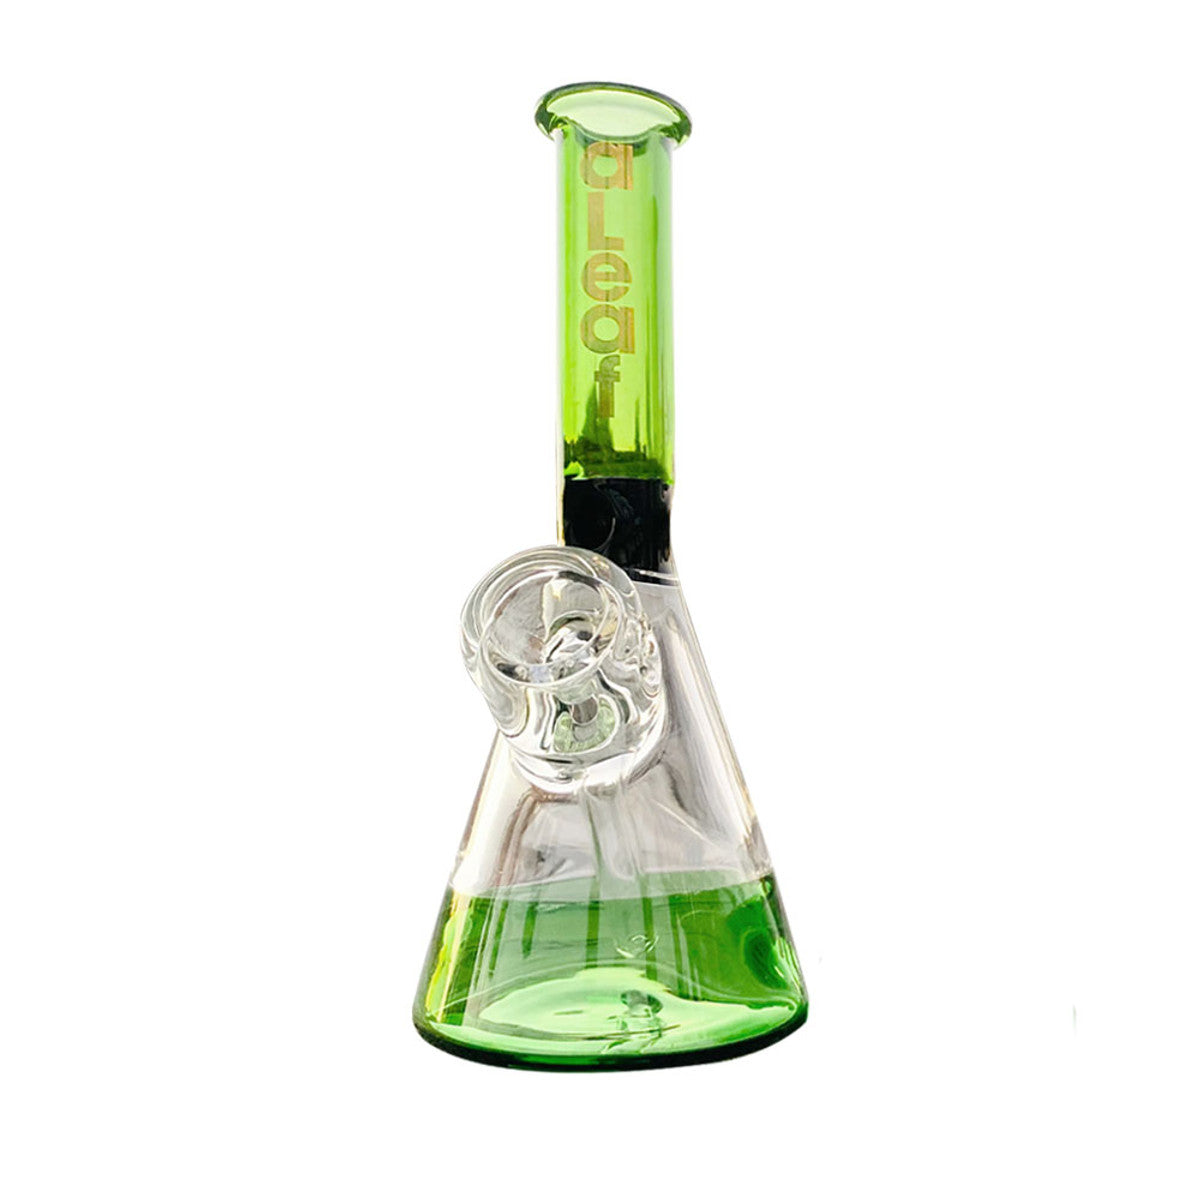 How cute are these mini beakers?! They are designed with a built-in bowl and heavy duty glass. Limited quantities available - get yours today!  ALeaf Glass makes quality and reliable glass products. aLeaf glass products produce amazing smoke and are extremely sturdy. Smoke from aLeaf Glass and you will instantly feel the difference!